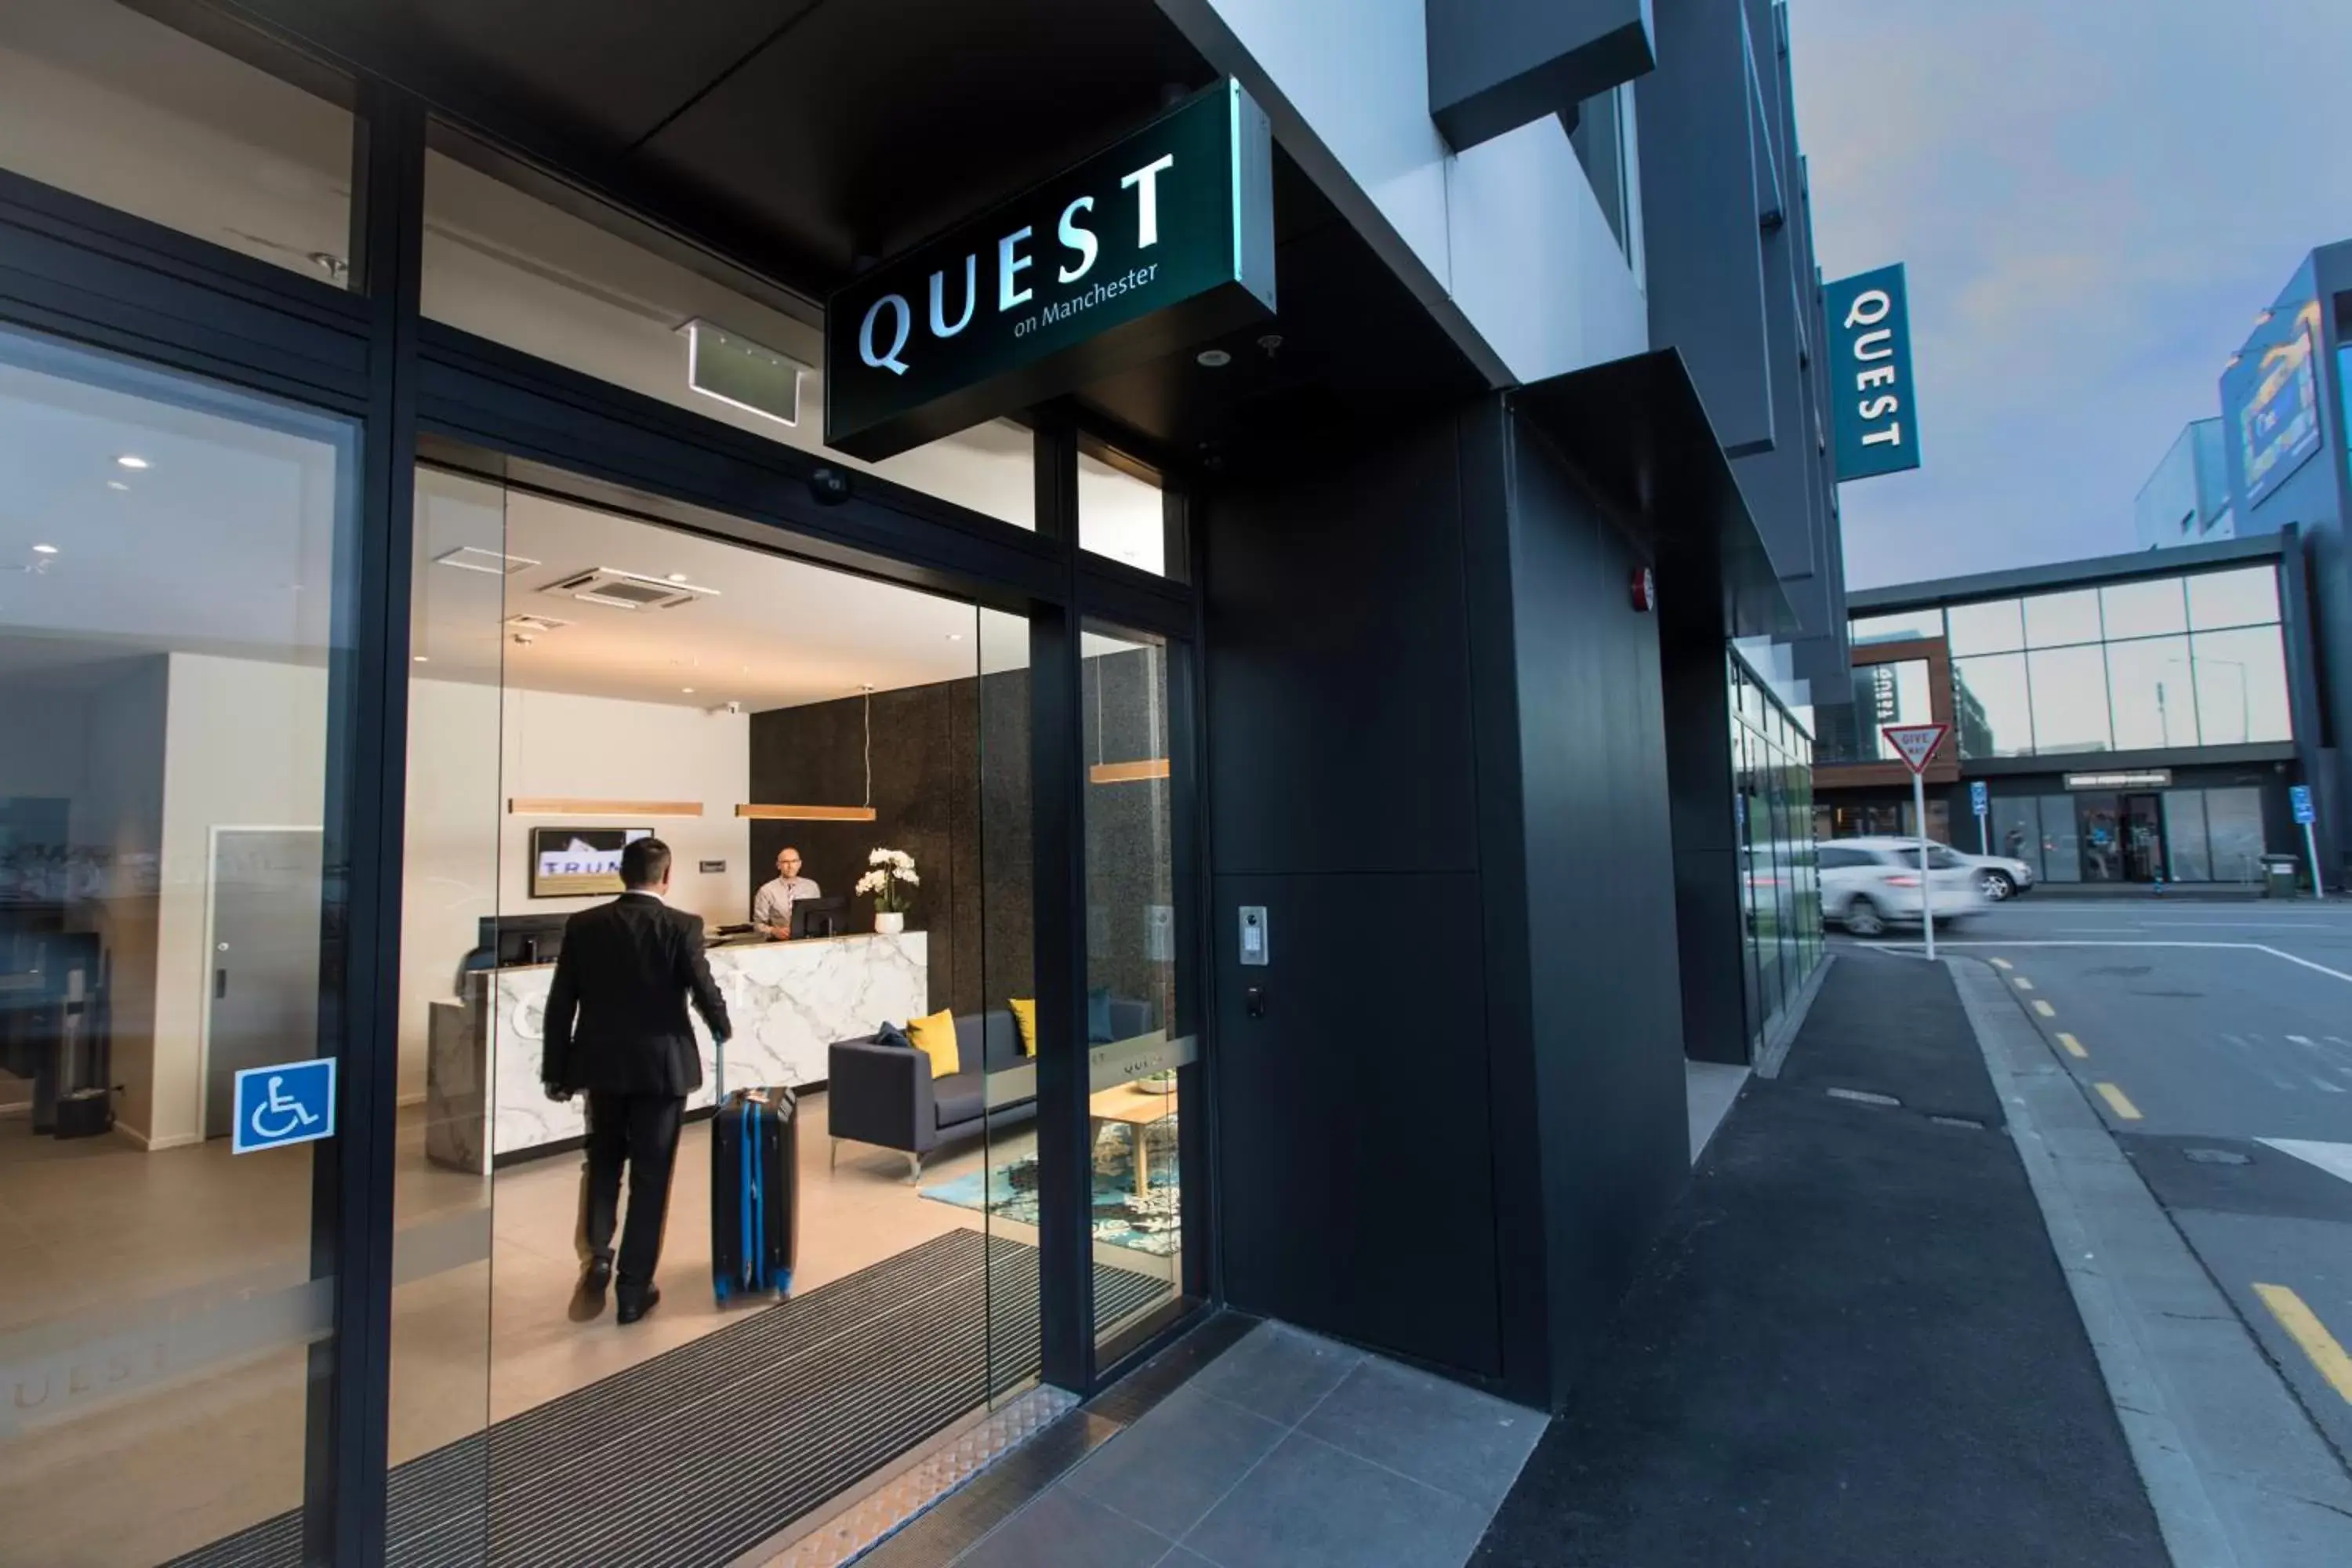 Staff in Quest on Manchester Serviced Apartments